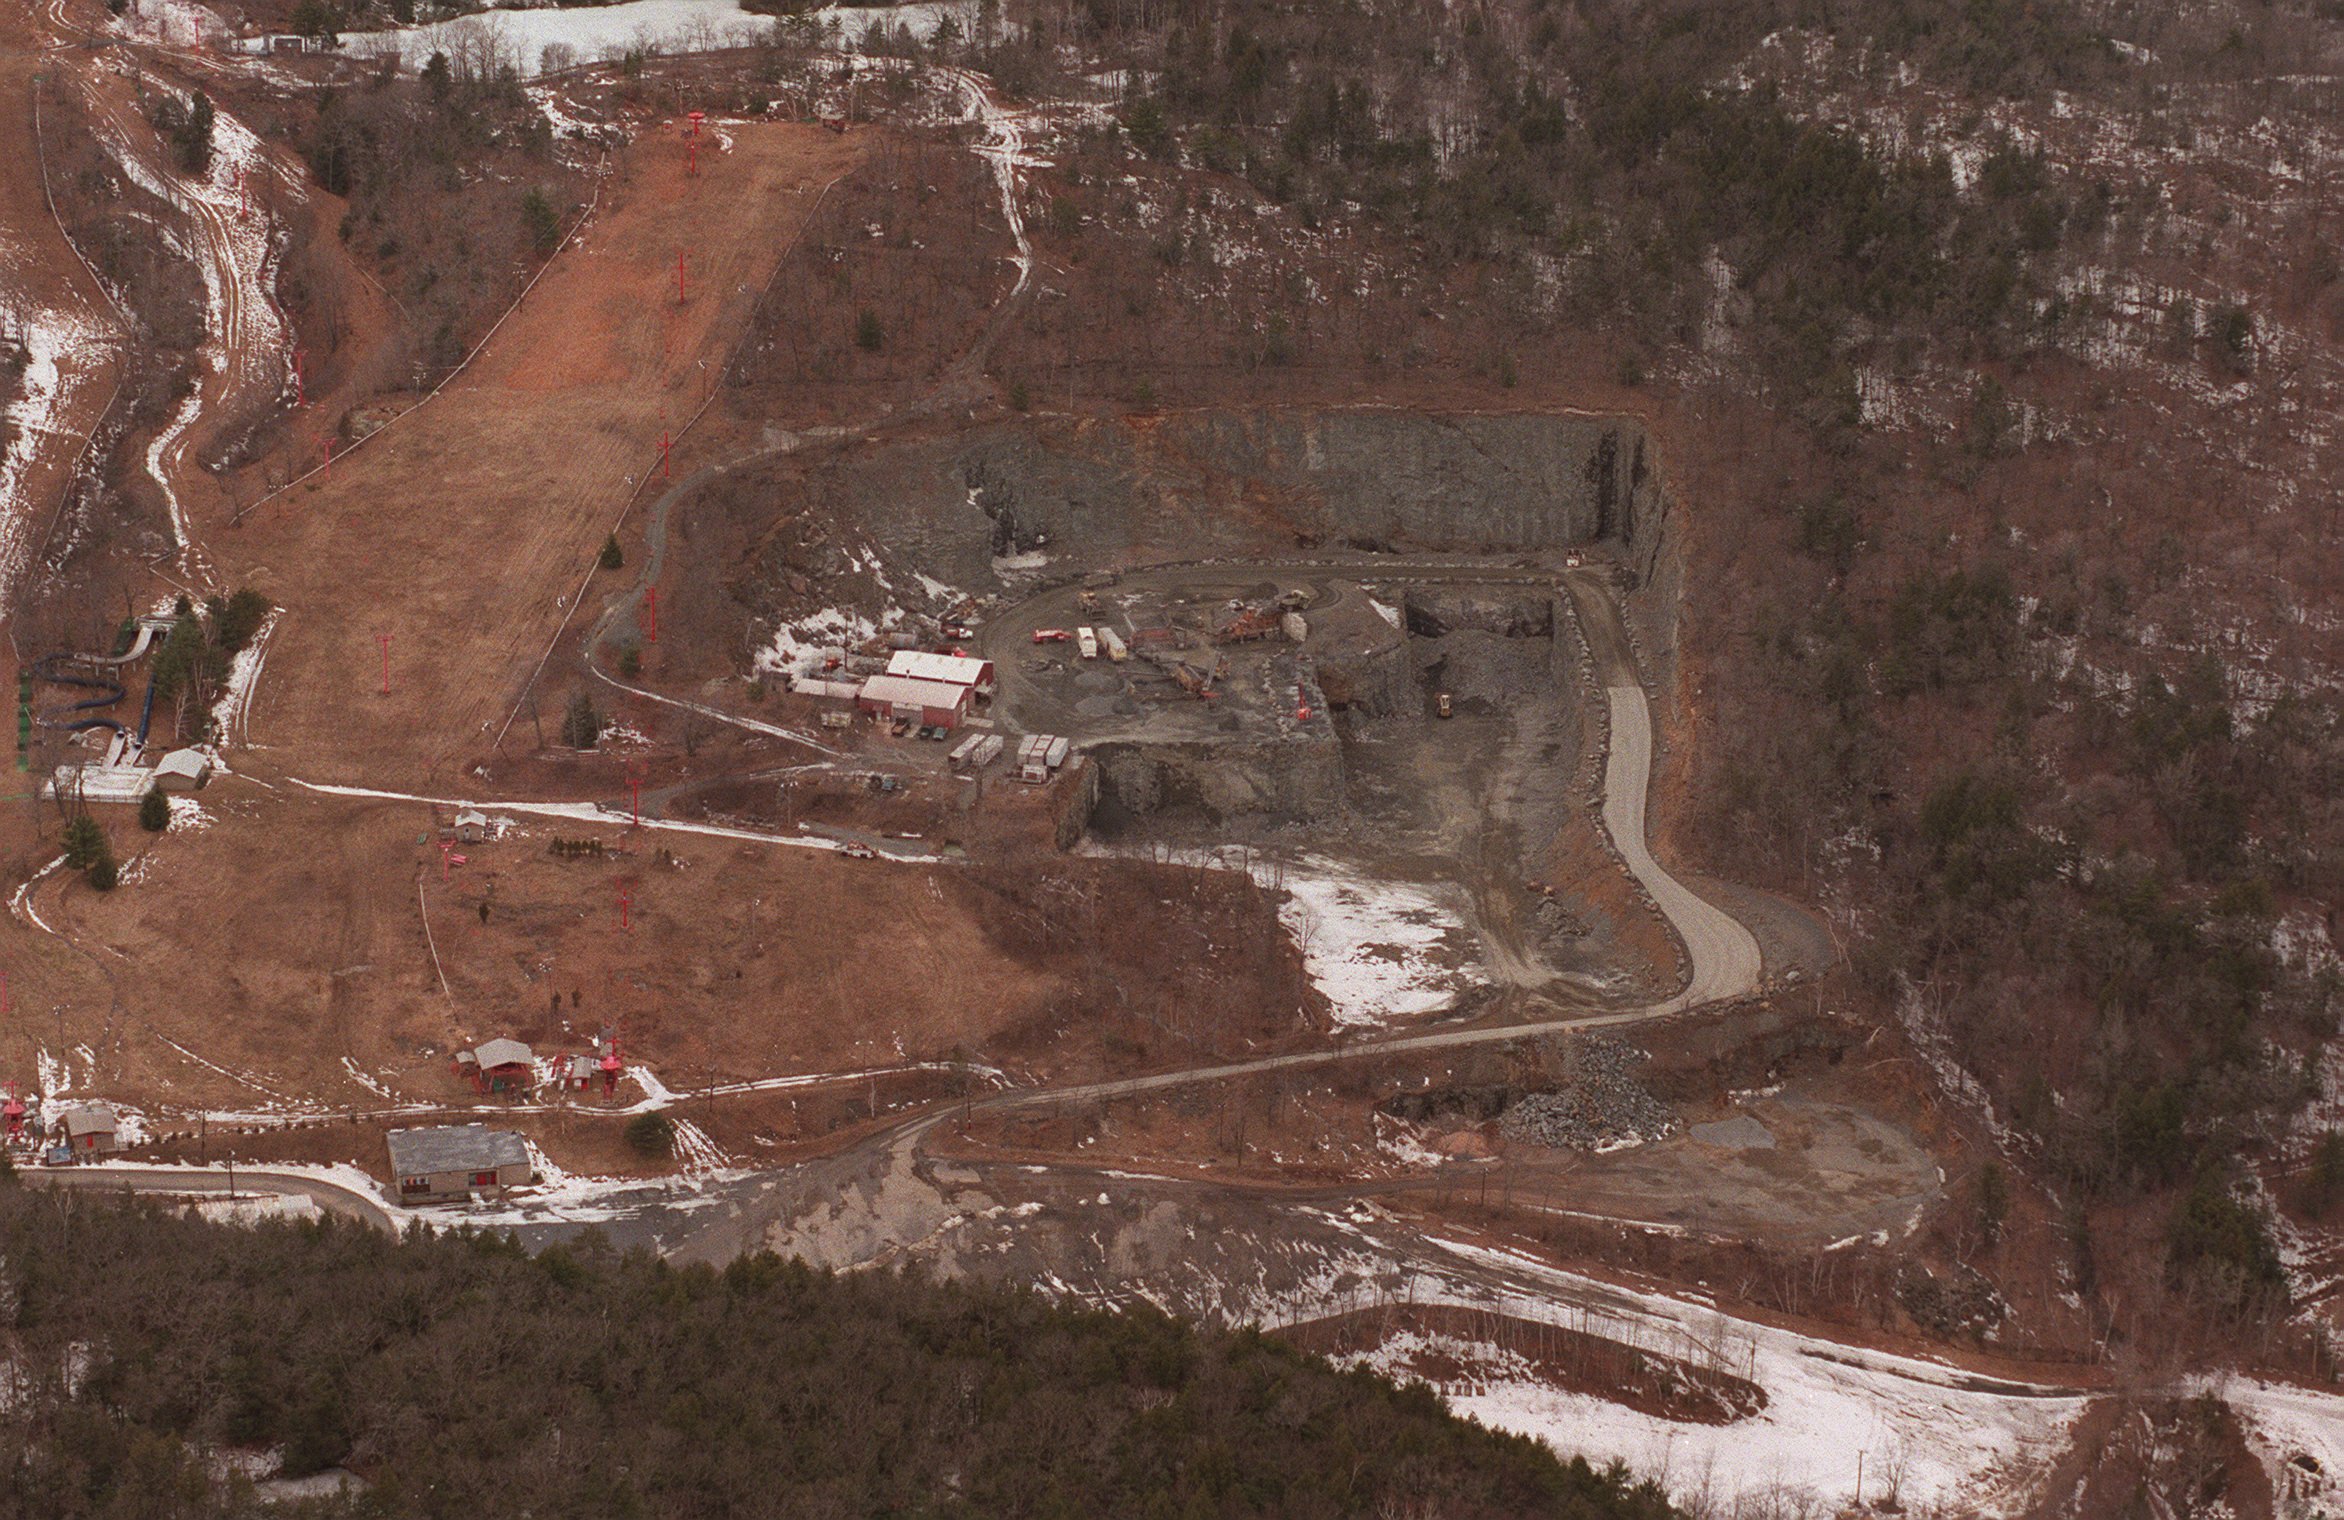 A photo from 1999 showing work underway at the quarry site on Mt. Tom.  The quarry has been inactive since 2012, and the crater is much larger than shown here.